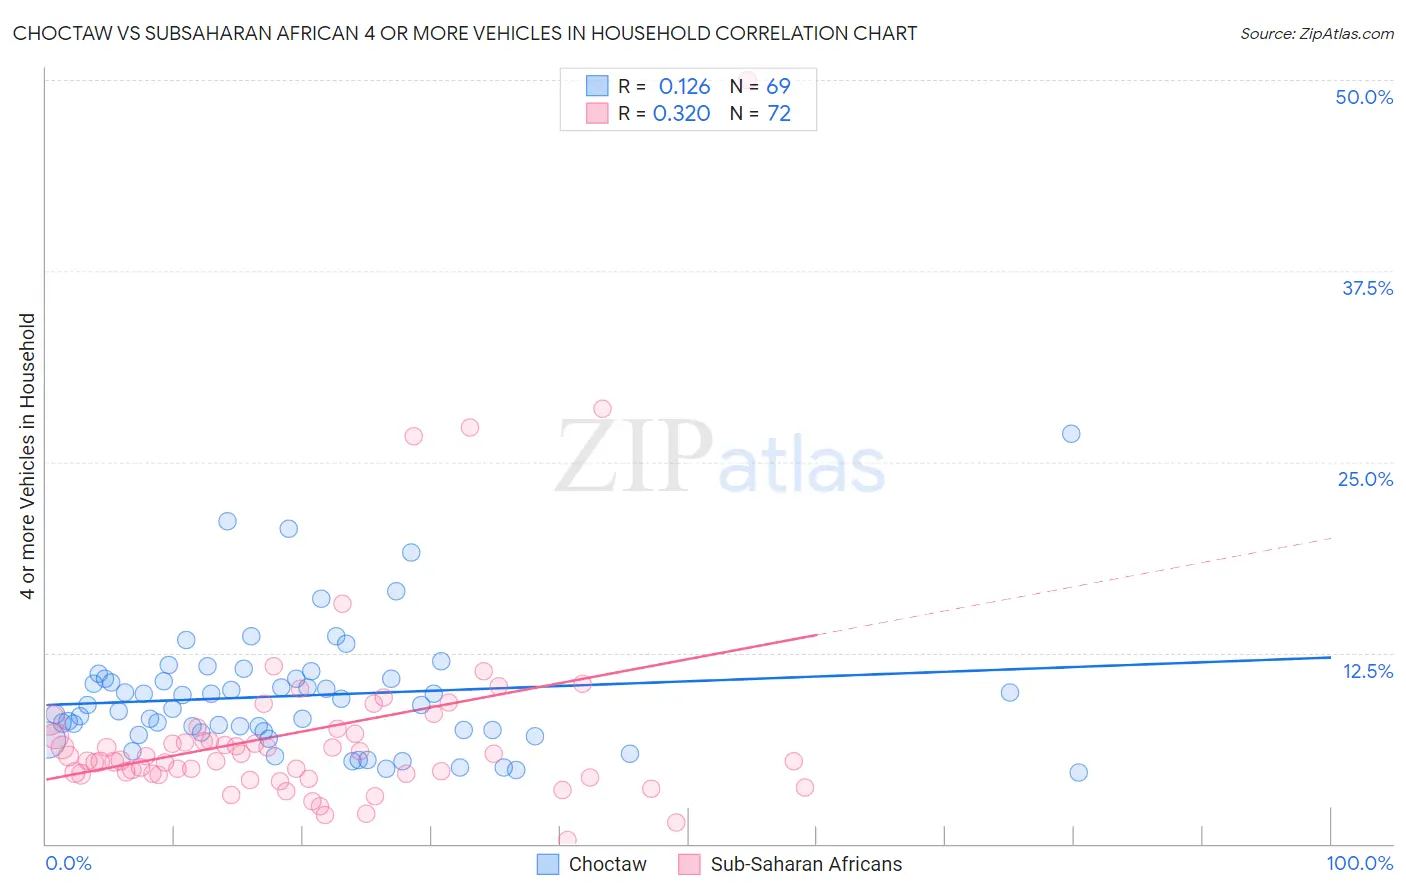 Choctaw vs Subsaharan African 4 or more Vehicles in Household